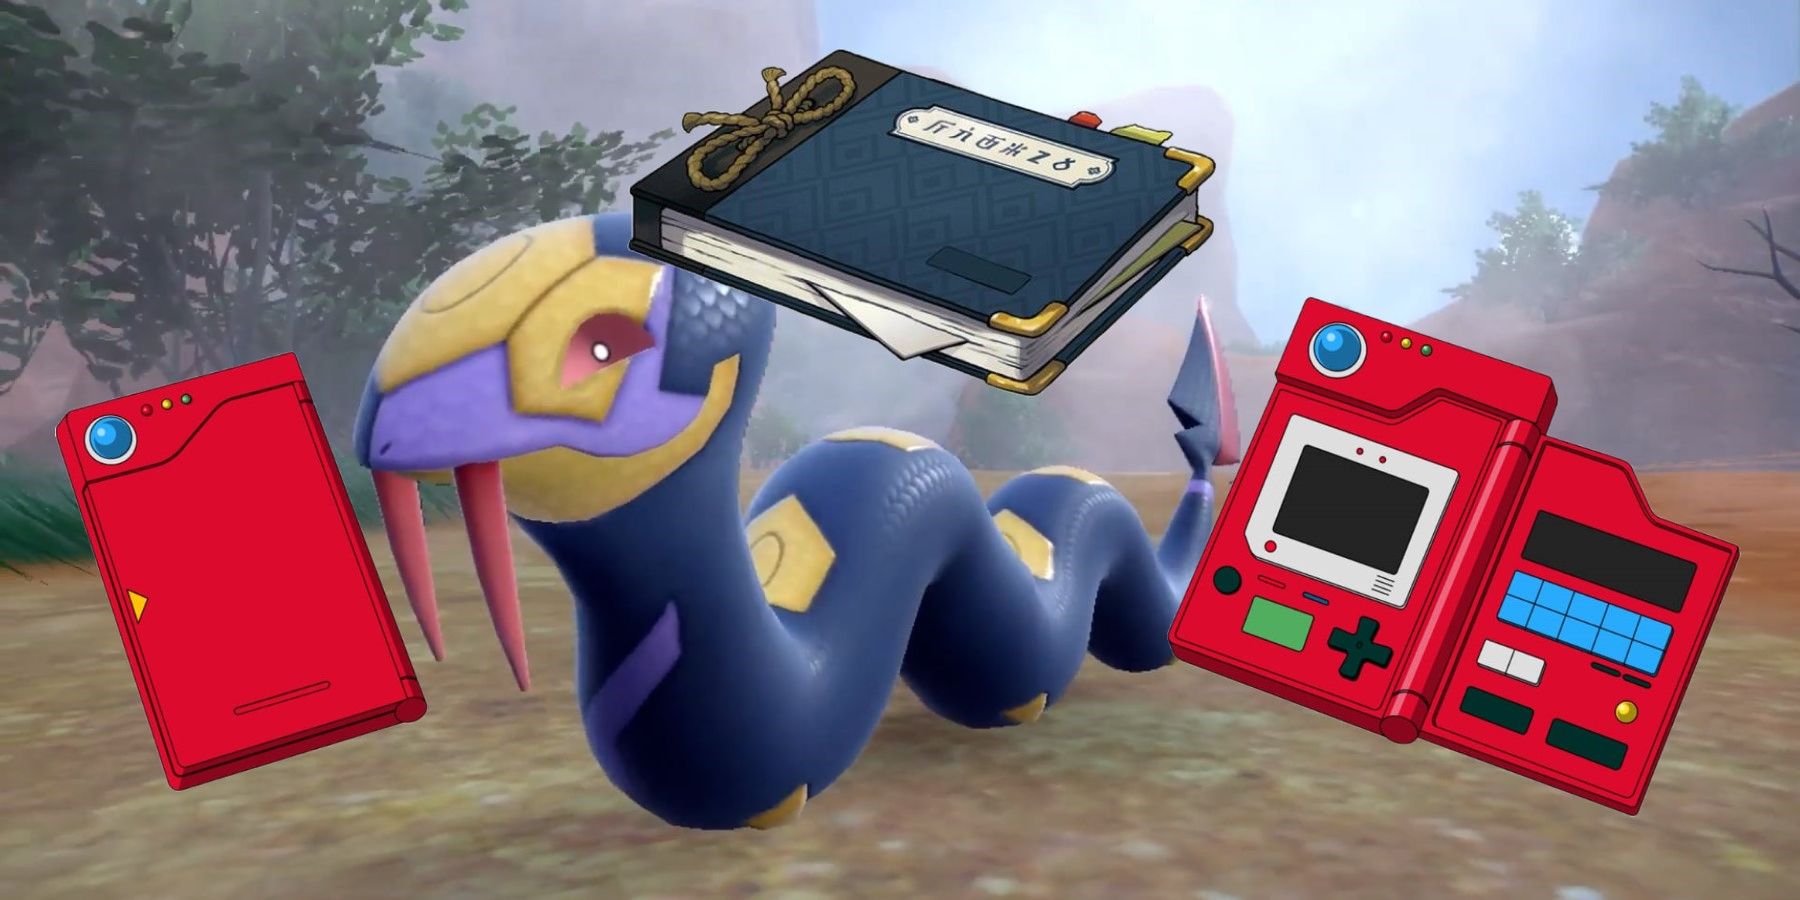 Pokemon Scarlet and Violet: How to Open the Pokedex